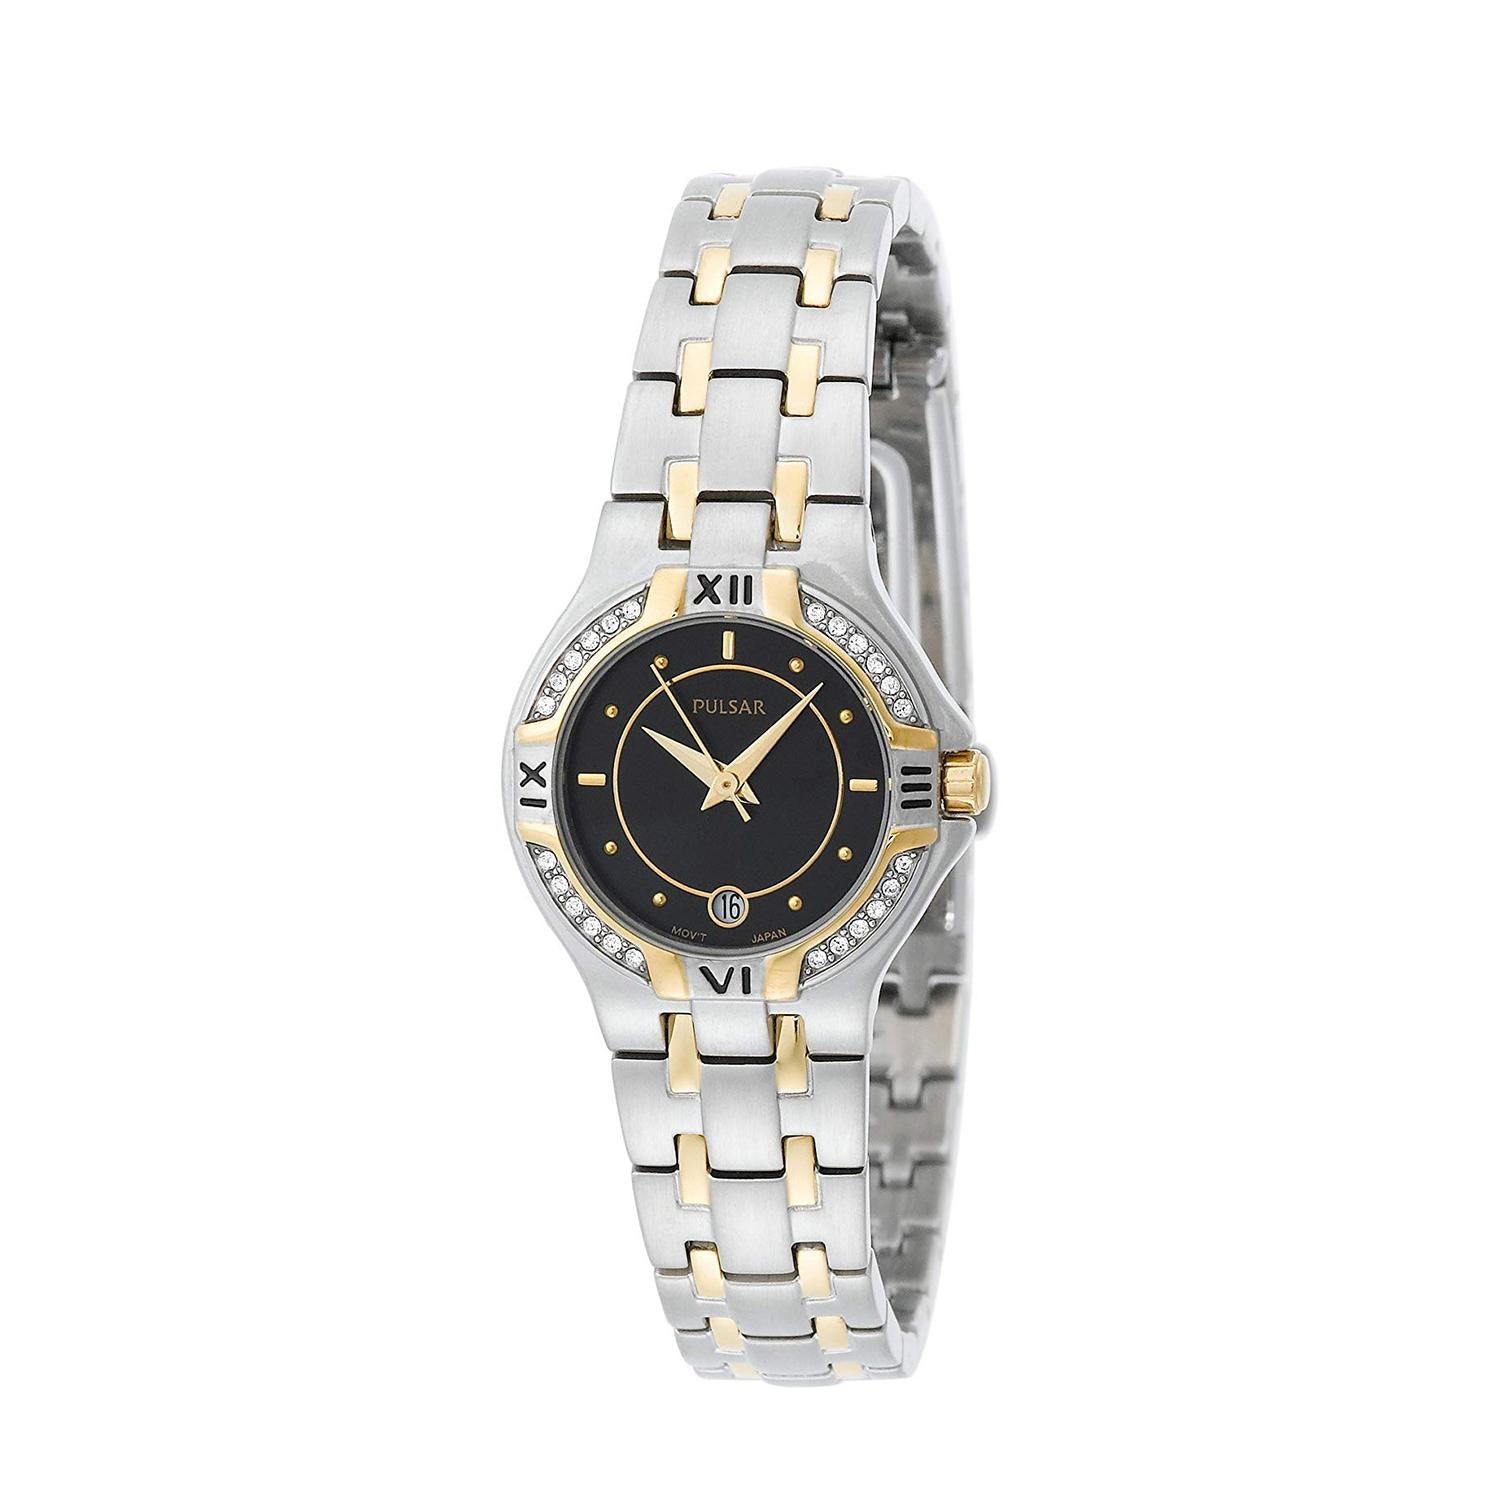 This display model Pulsar Crystals PXT606 is a beautiful Ladie's timepiece that is powered by quartz (battery) movement which is cased in a stainless steel case. It has a round shape face, date indicator dial and has hand sticks & dots style